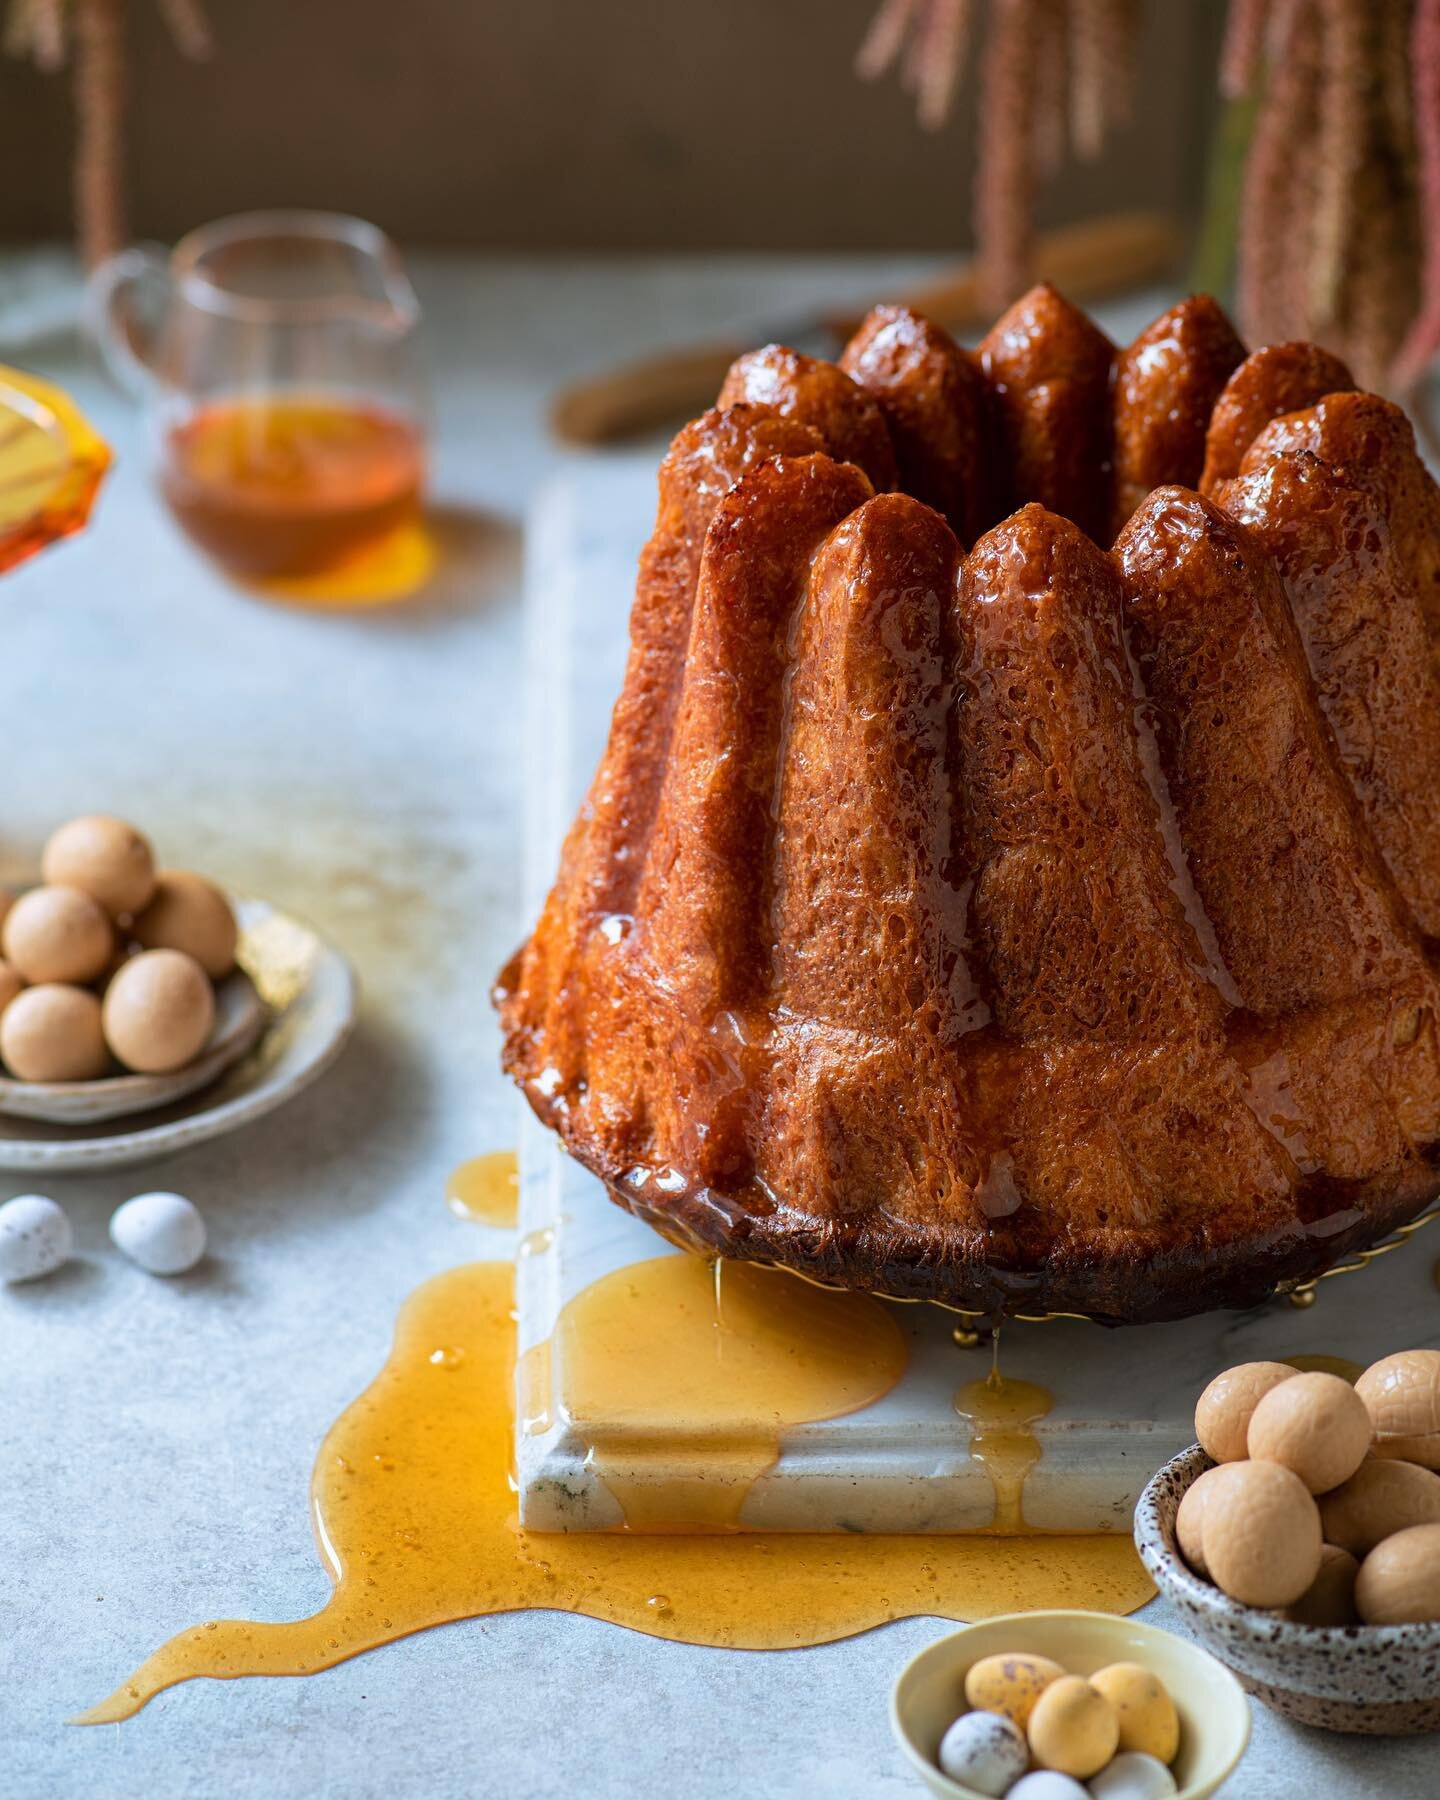 Here&rsquo;s an early Easter treat. A hybrid of Easter bread, buns and cake that has evolved into a Grand Spiced Honey Gugelhupf.
The dough is a buttery honey brioche spiced with Cardamon and soaked with spiced bush honey whilst still hot. Great for 